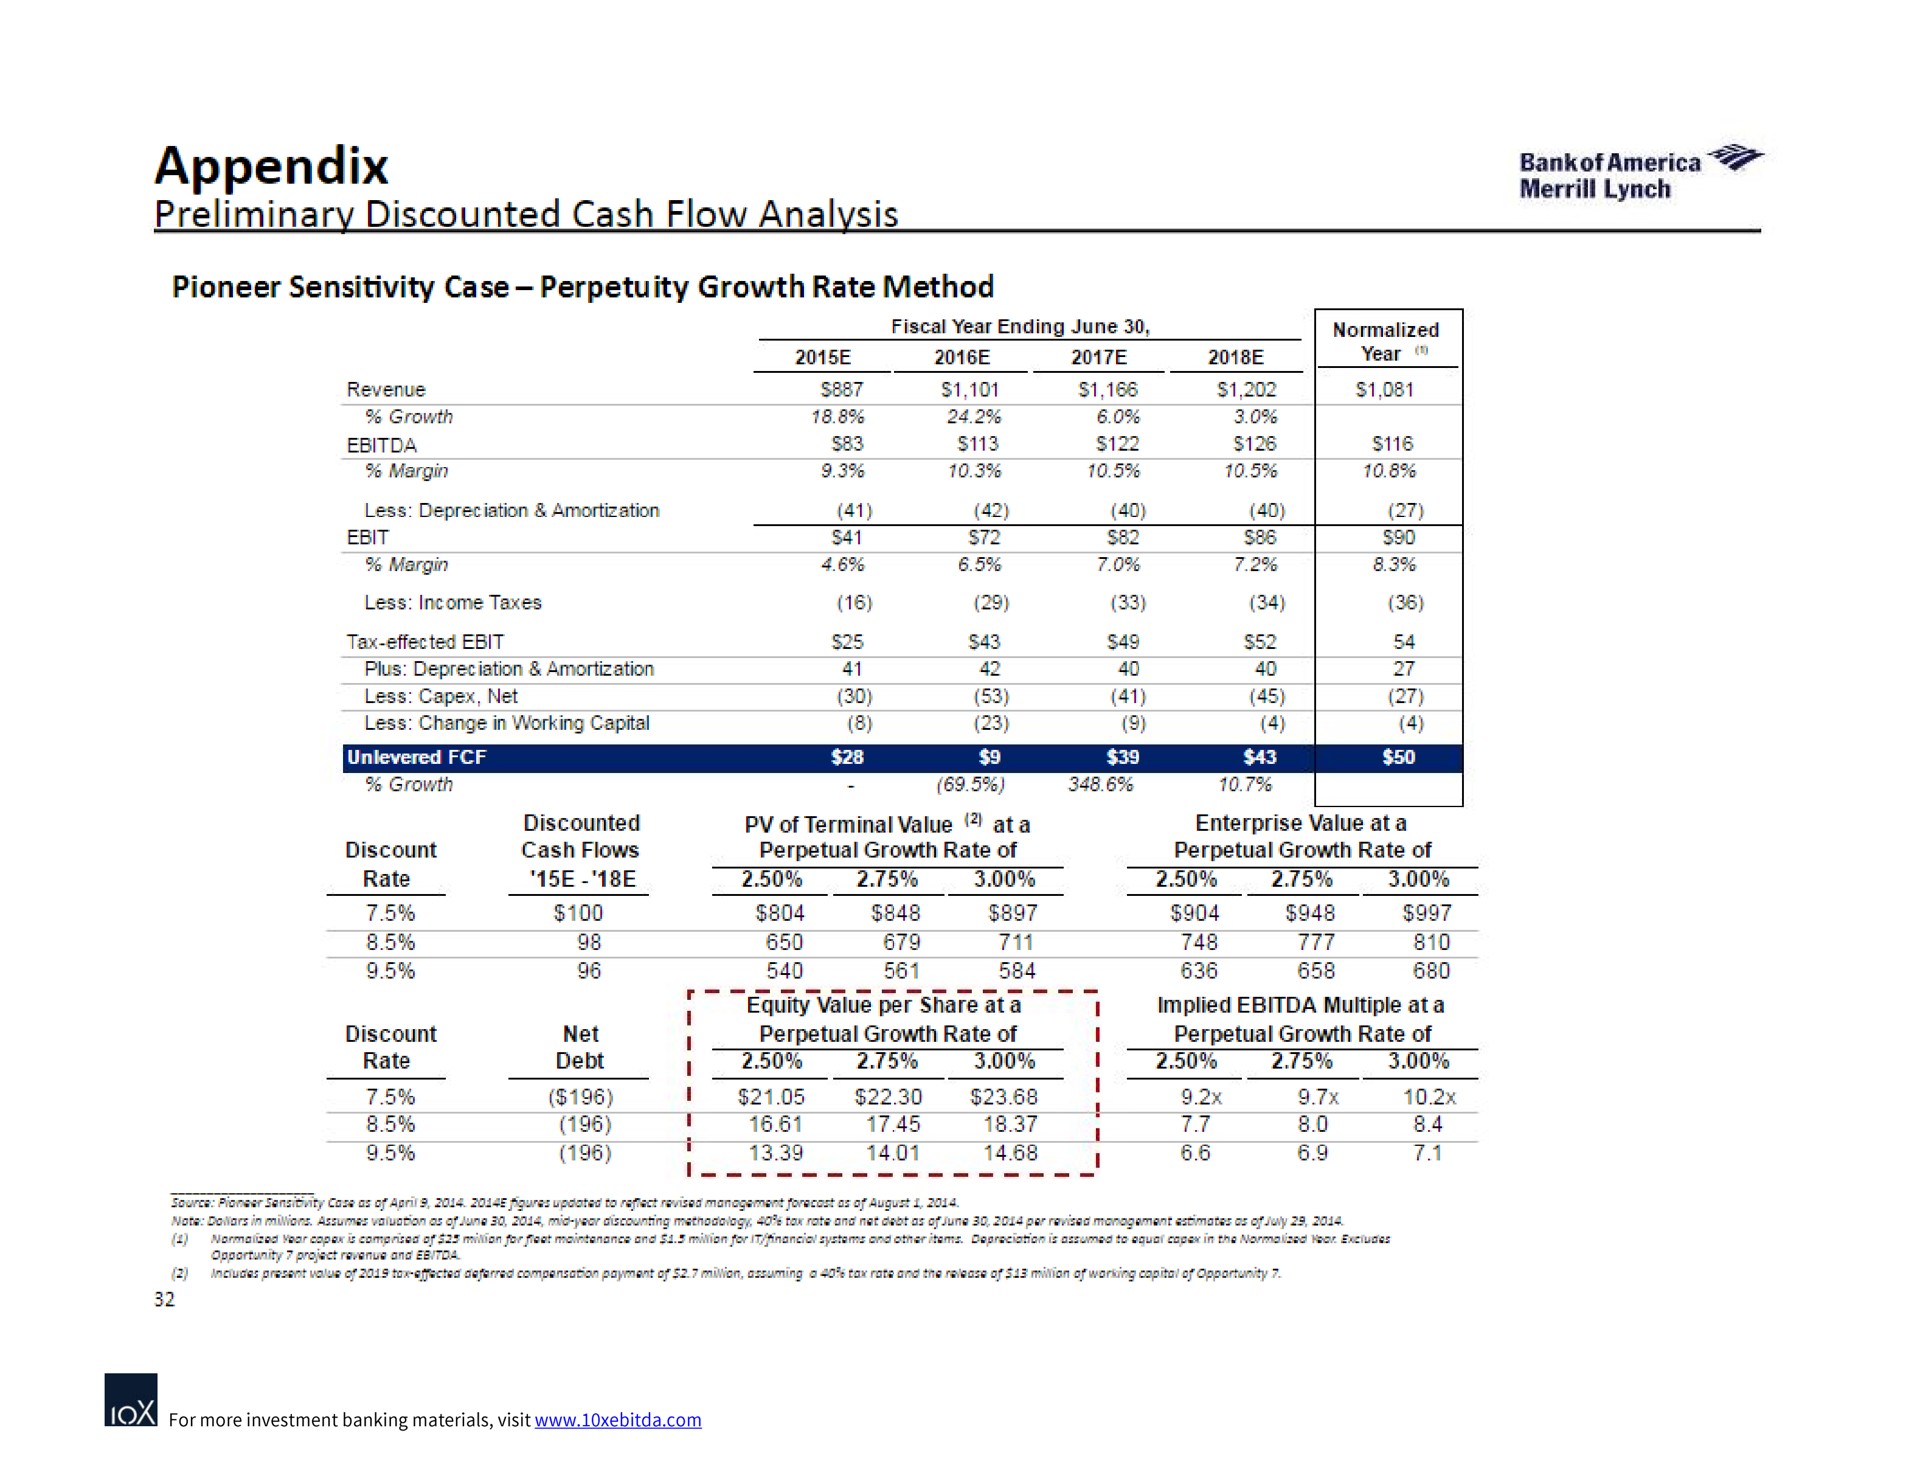 appendix preliminary discounted cash flow analysis | Bank of America